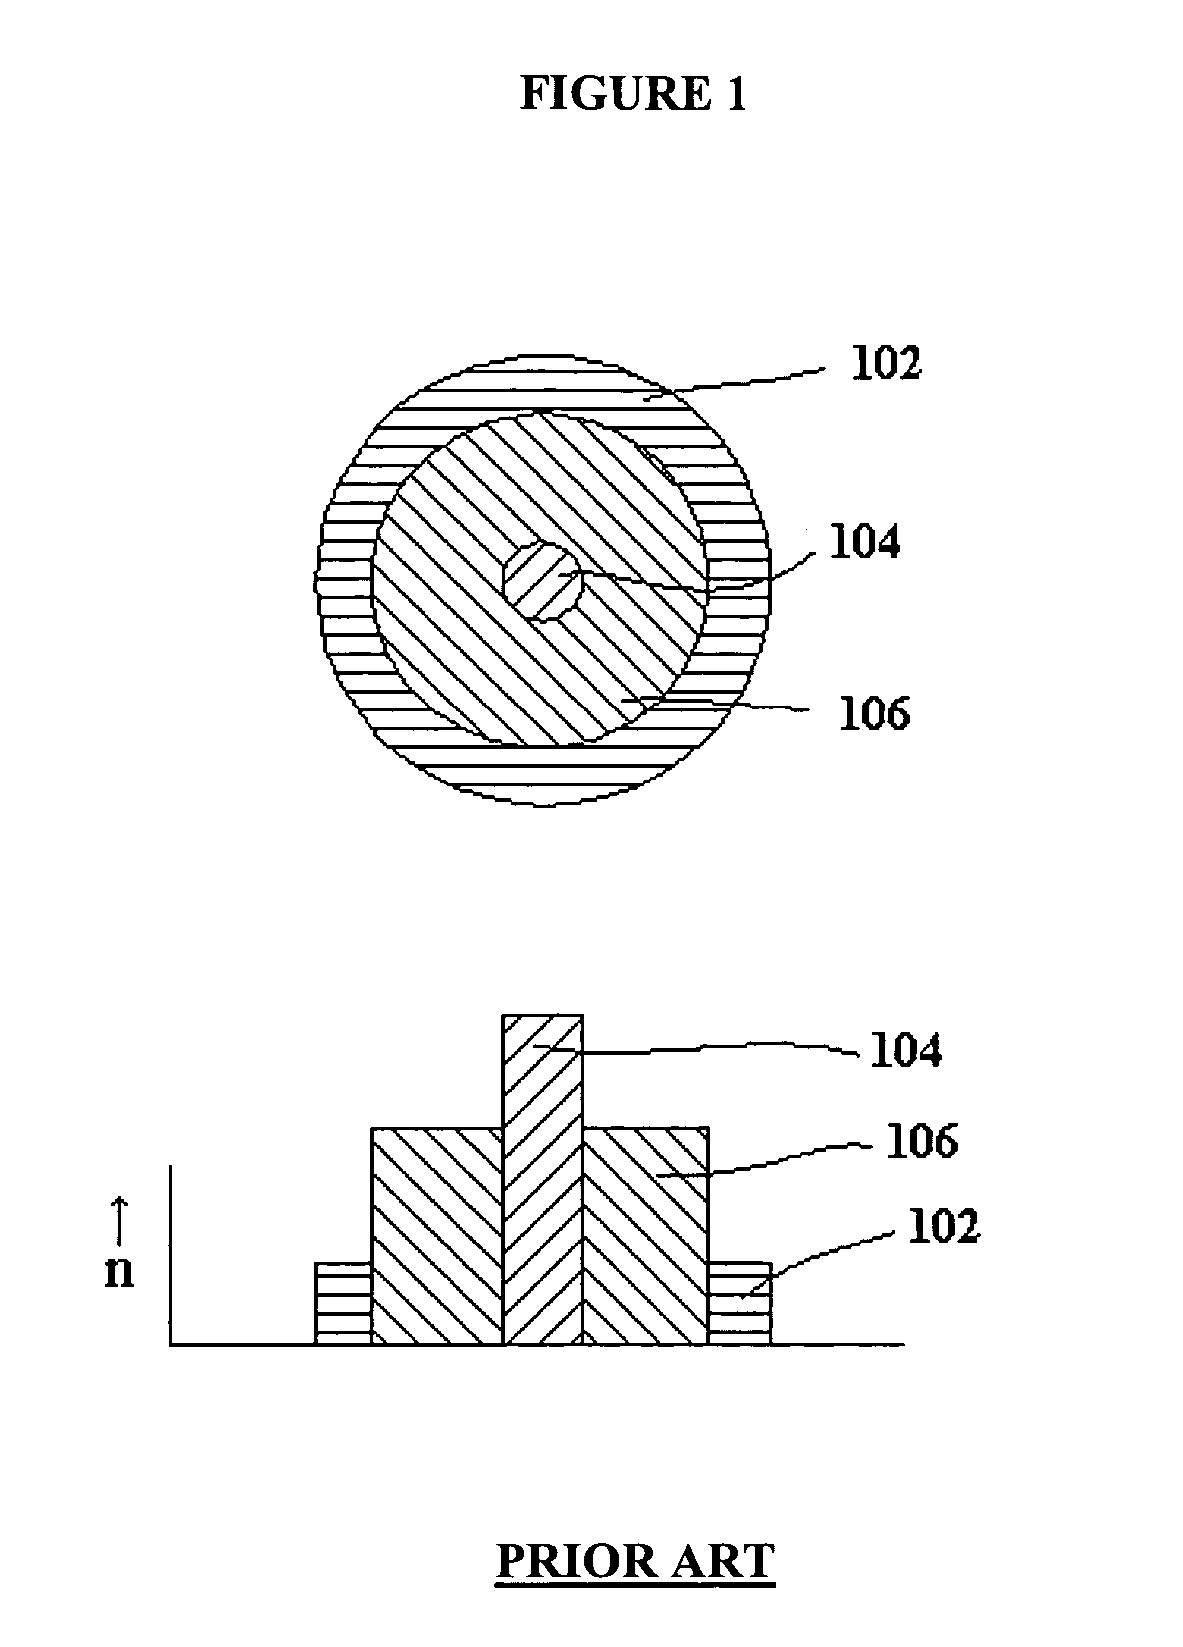 Multi-clad optical fiber lasers and their manufacture